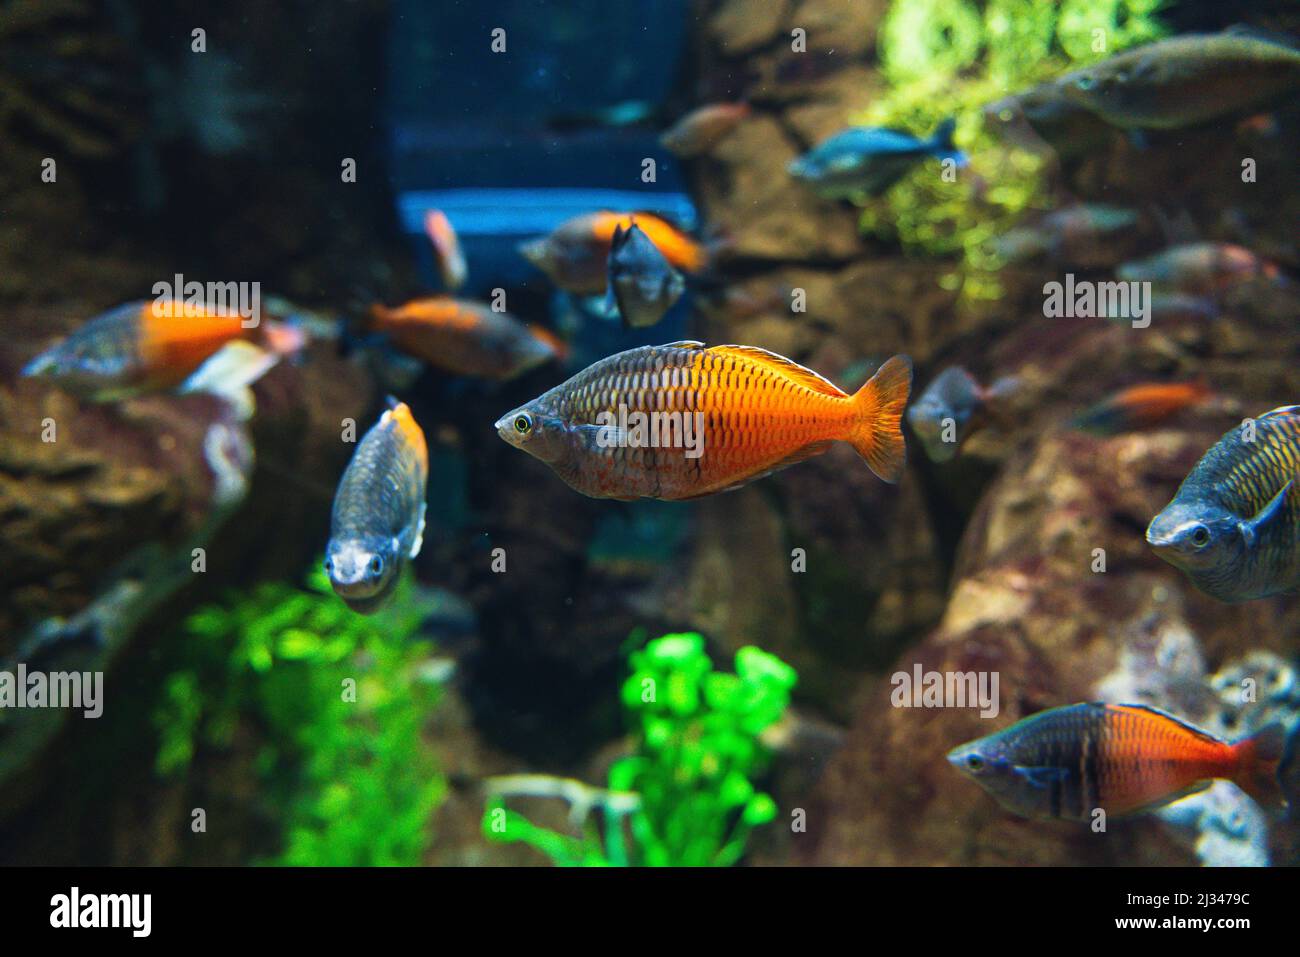 Close up on Boeseman's rainbowfish in a fish tank, with other Rainbowfish in the background. Stock Photo